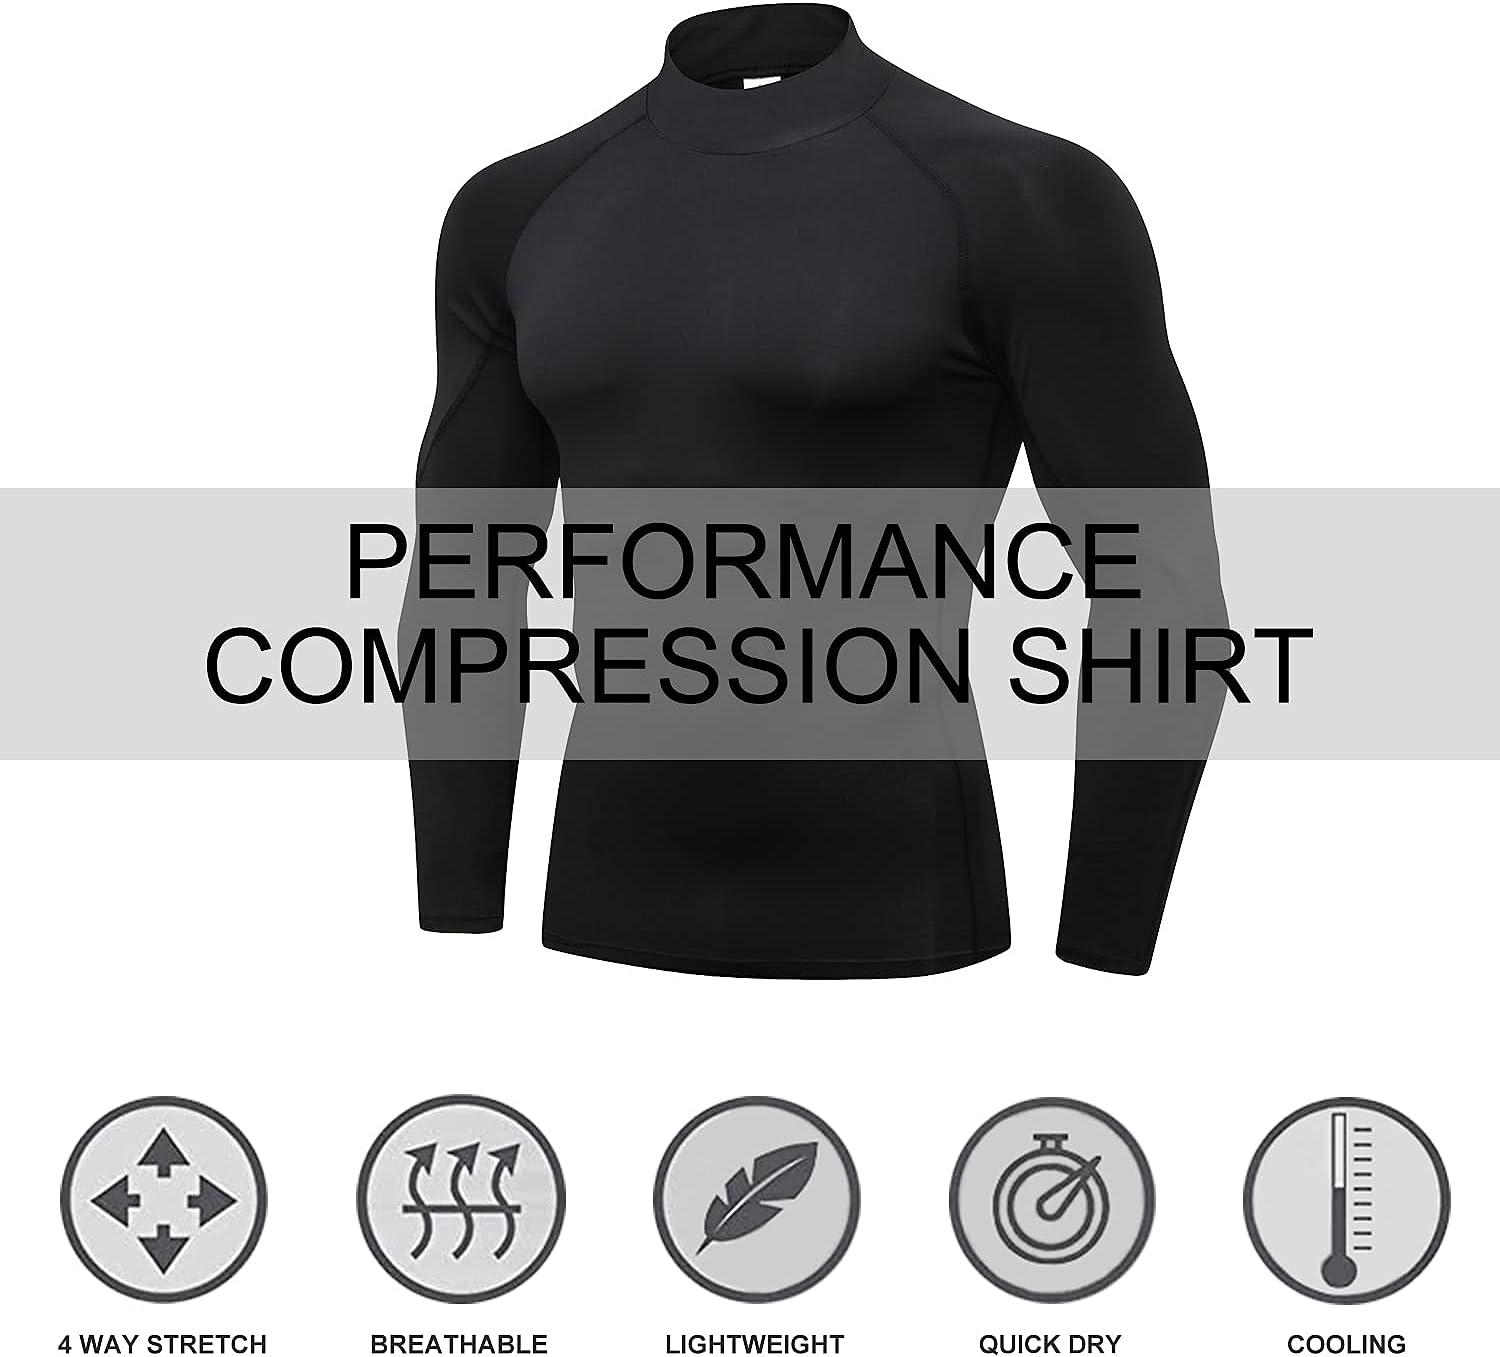 3 Pack Mens Mock Turtleneck Compression Shirts Long Sleeve Sun Protection Shirts  Cooling Workout Gym Tops Undershirt Blkgry+grey+white Large